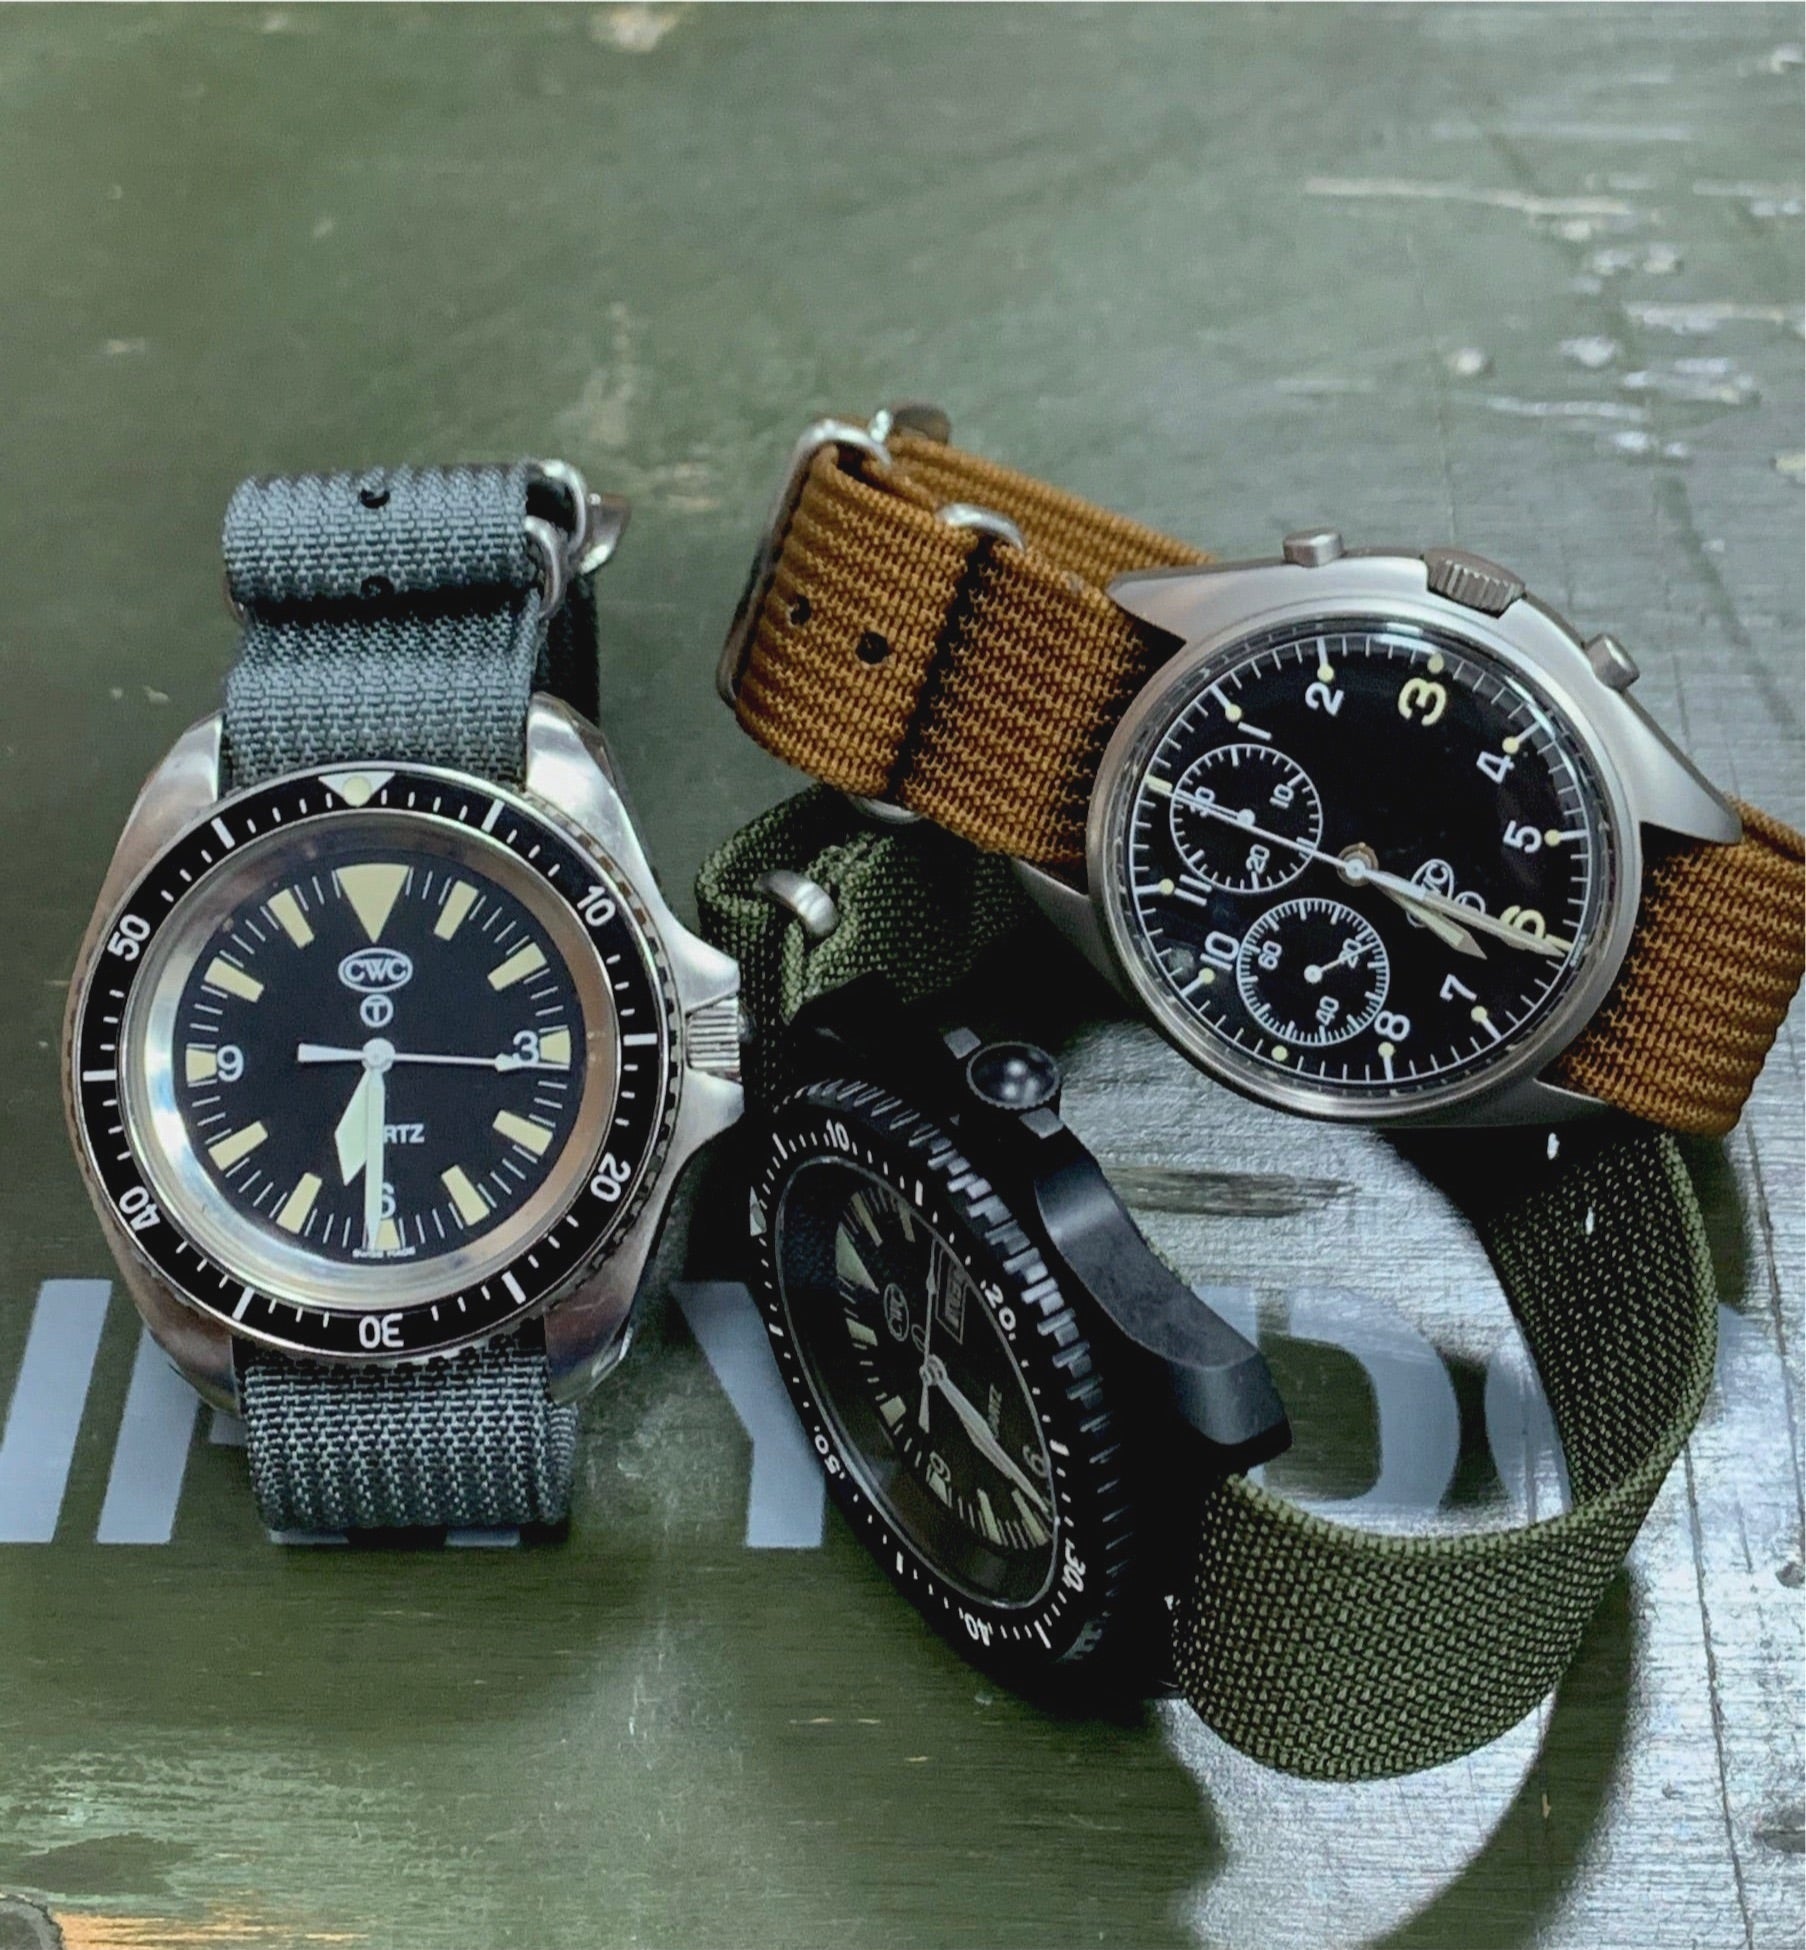 CWC SINGLE PASS RIBBED STRAPS ON WATCHES